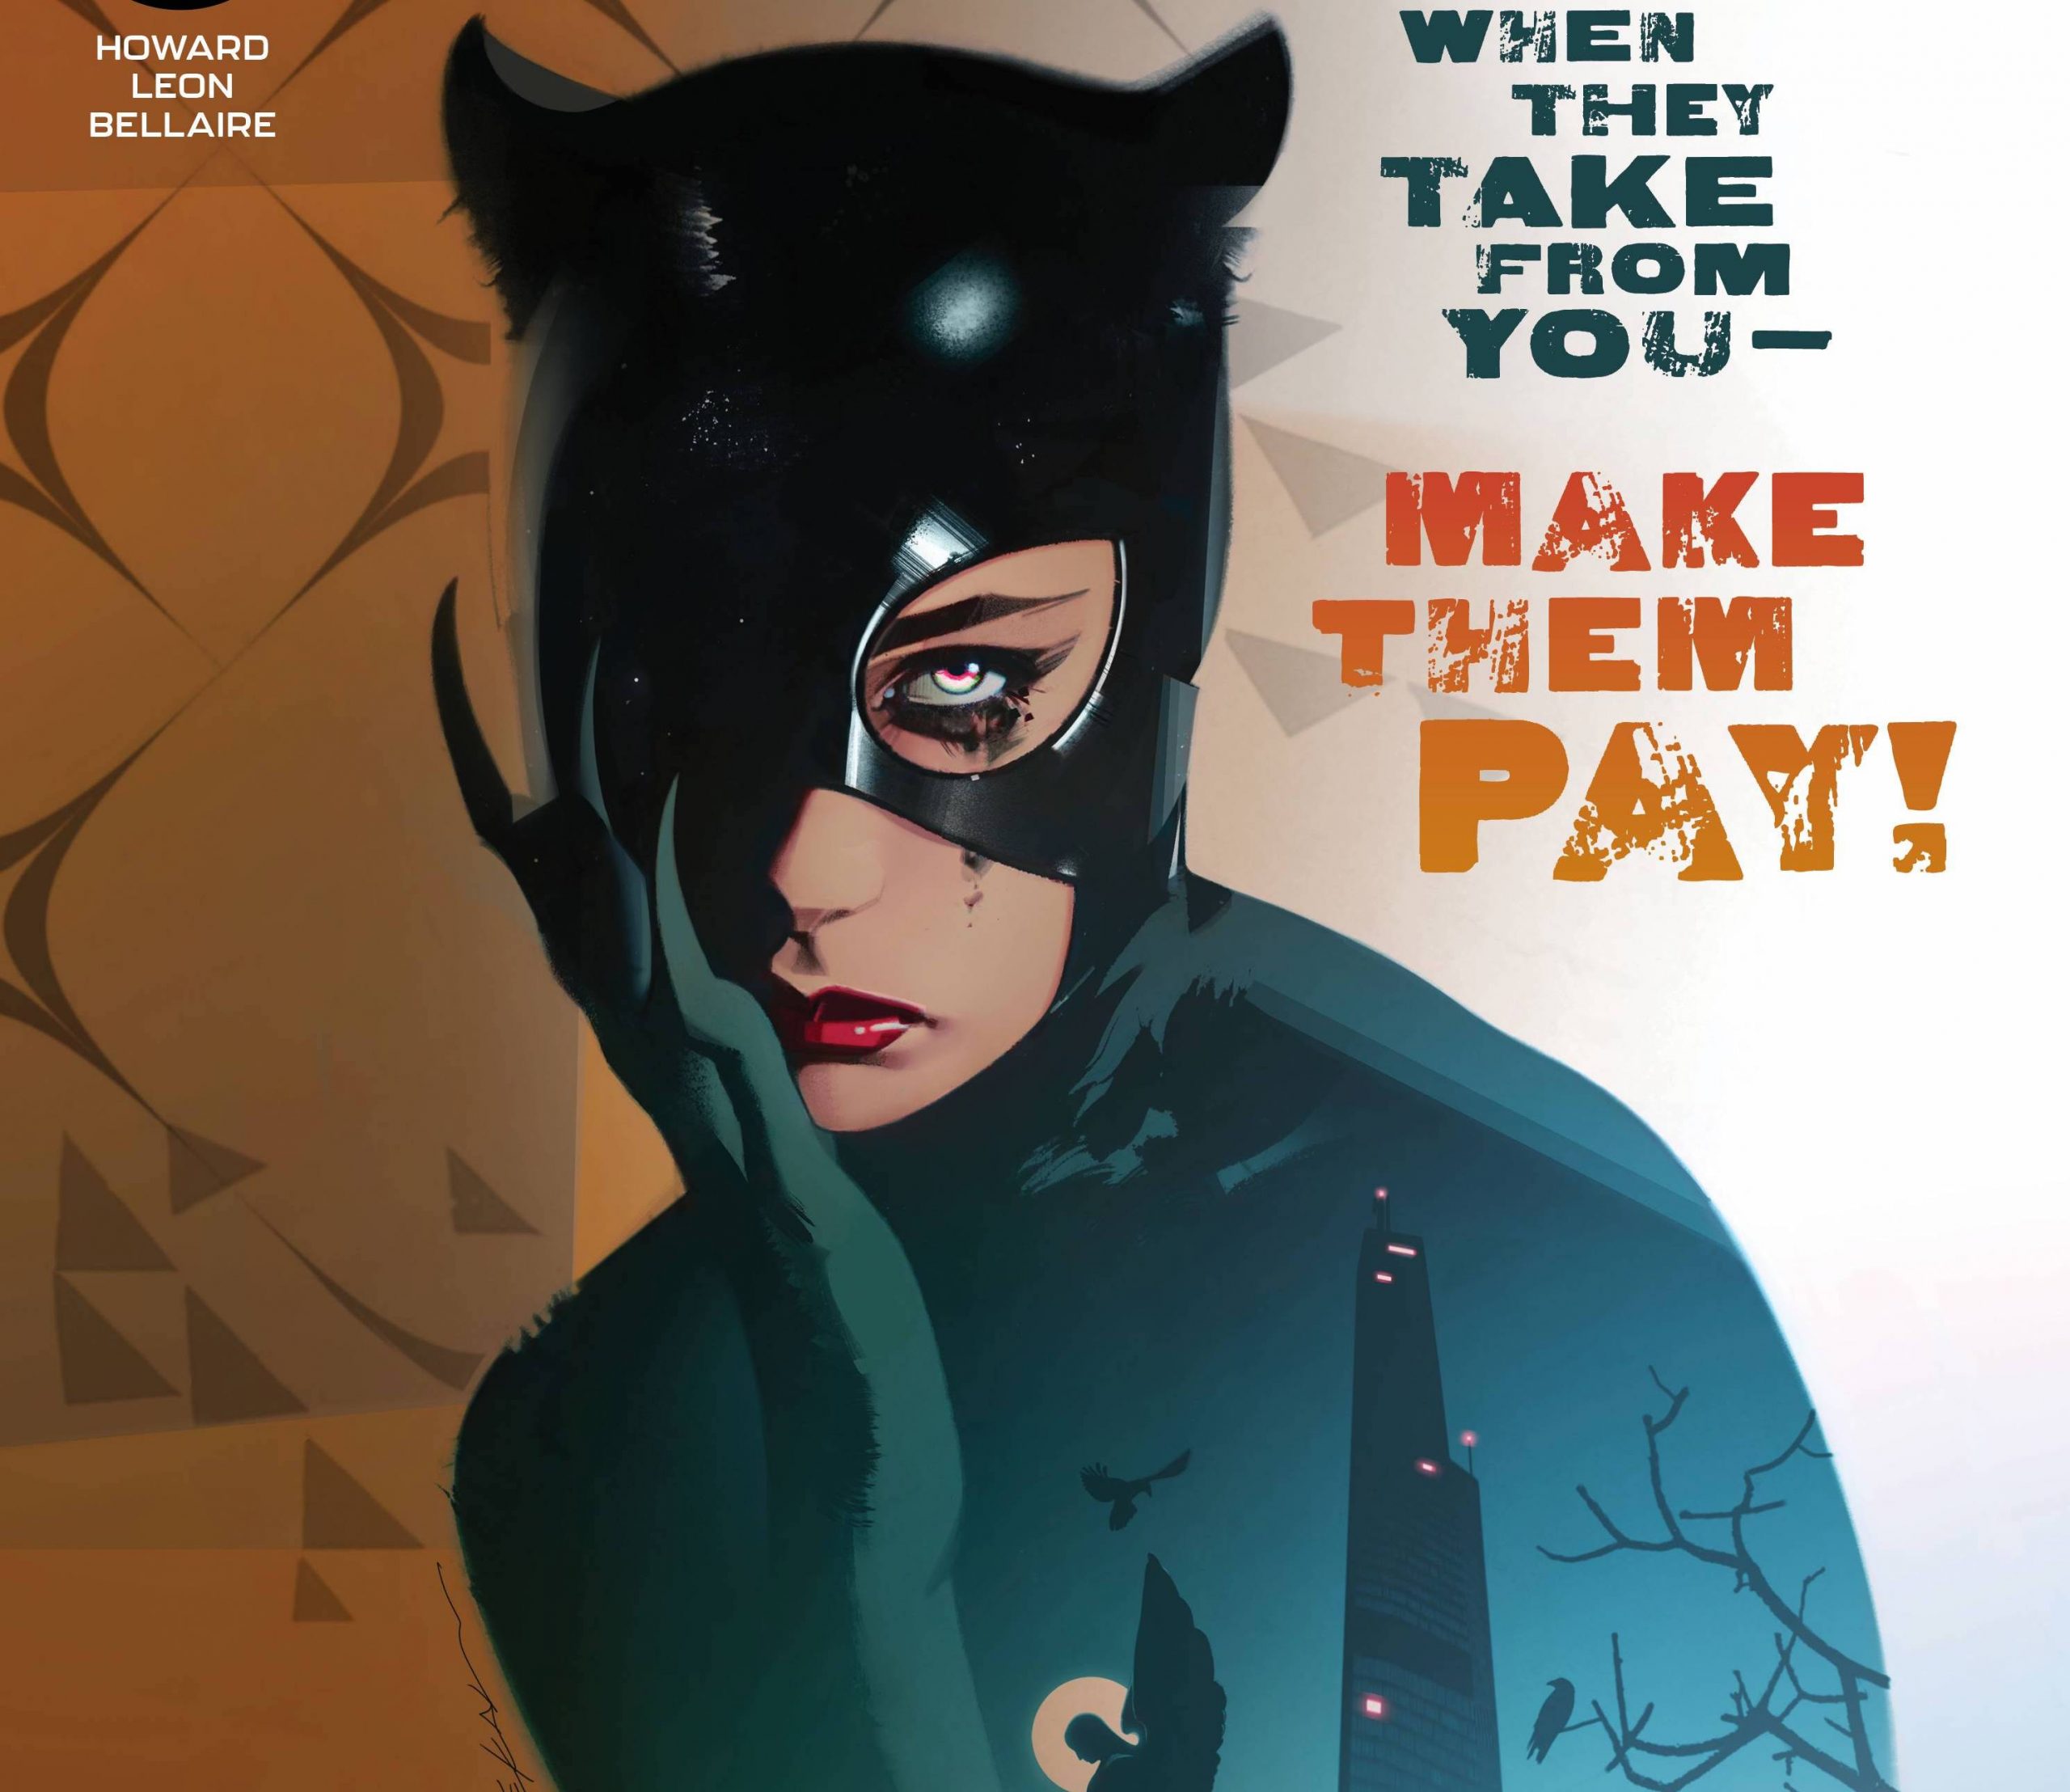 'Catwoman' #40 blends mobsters and stylish art well